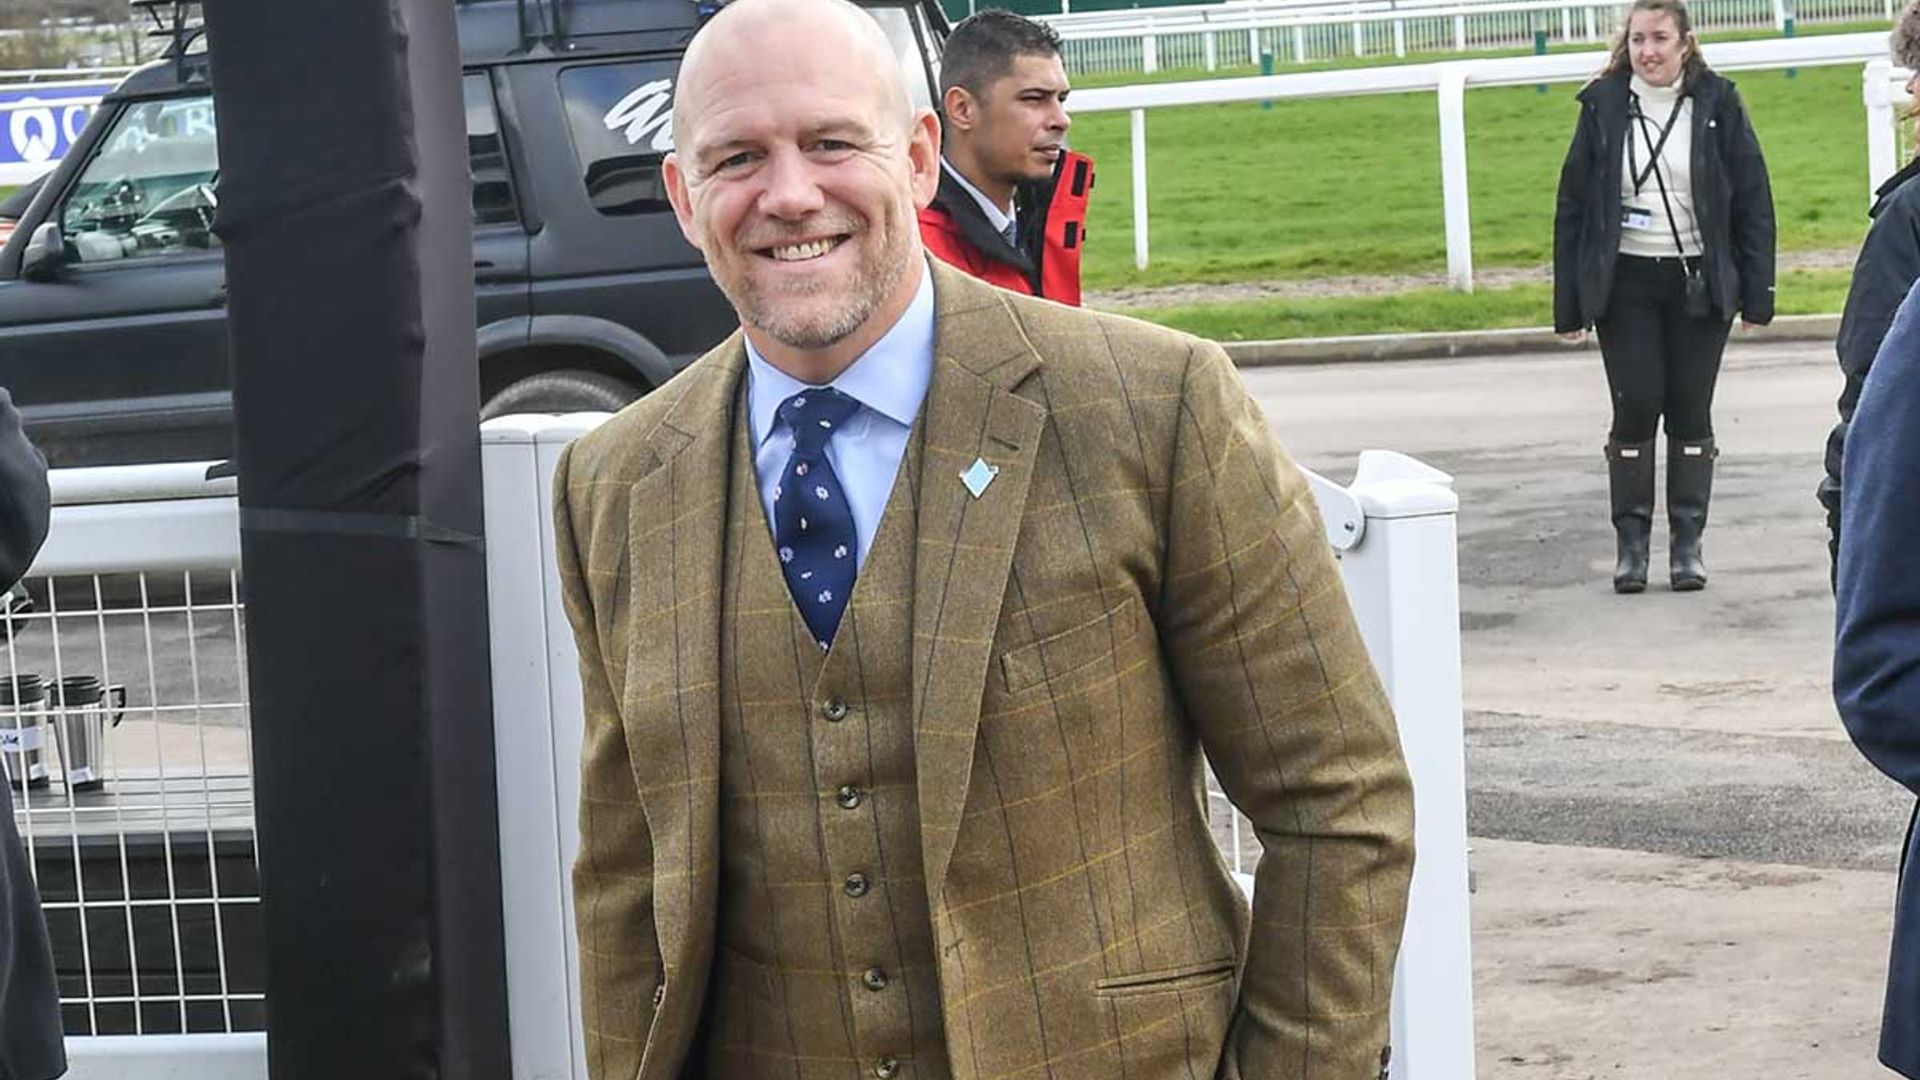 Mike Tindall is giddy with excitement on solo day out ahead of 'joint royal christenings'